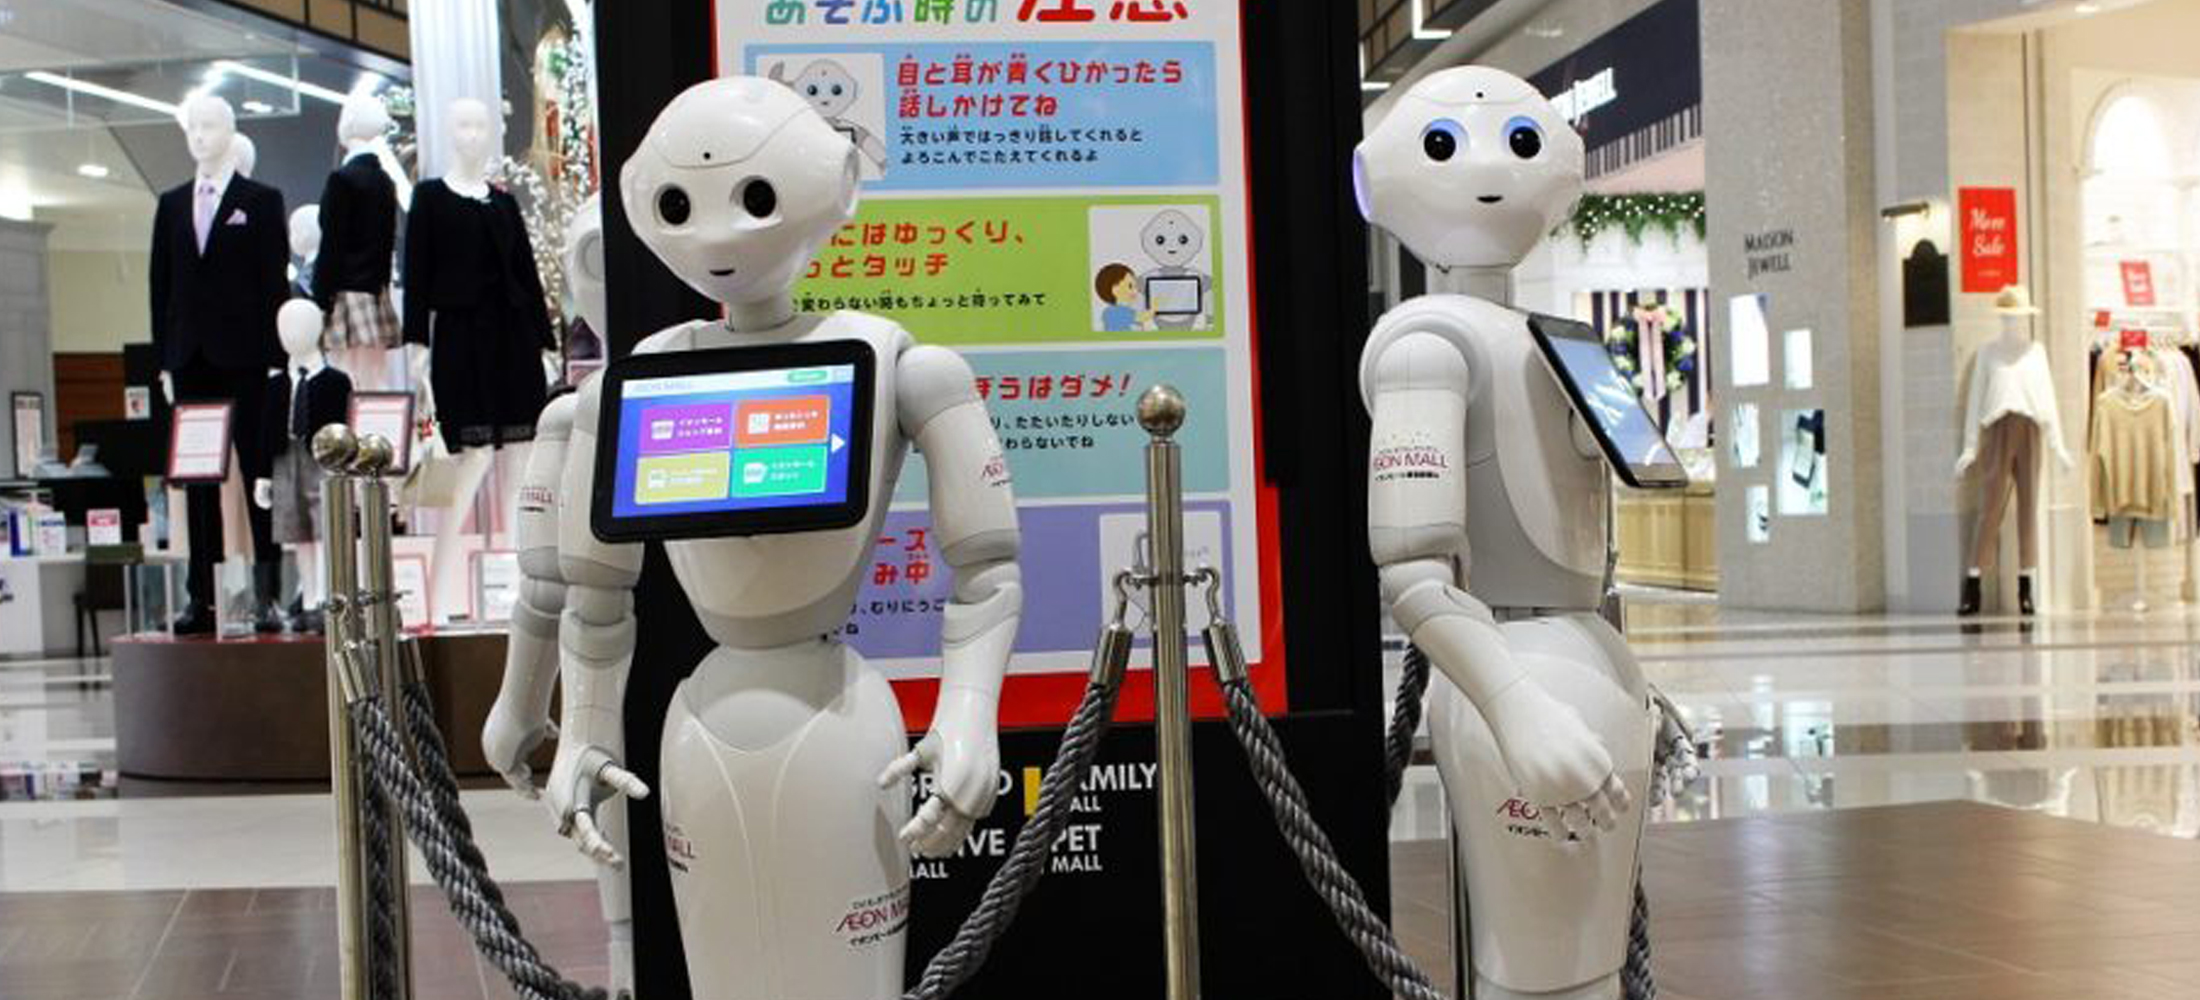 robots standing in mall